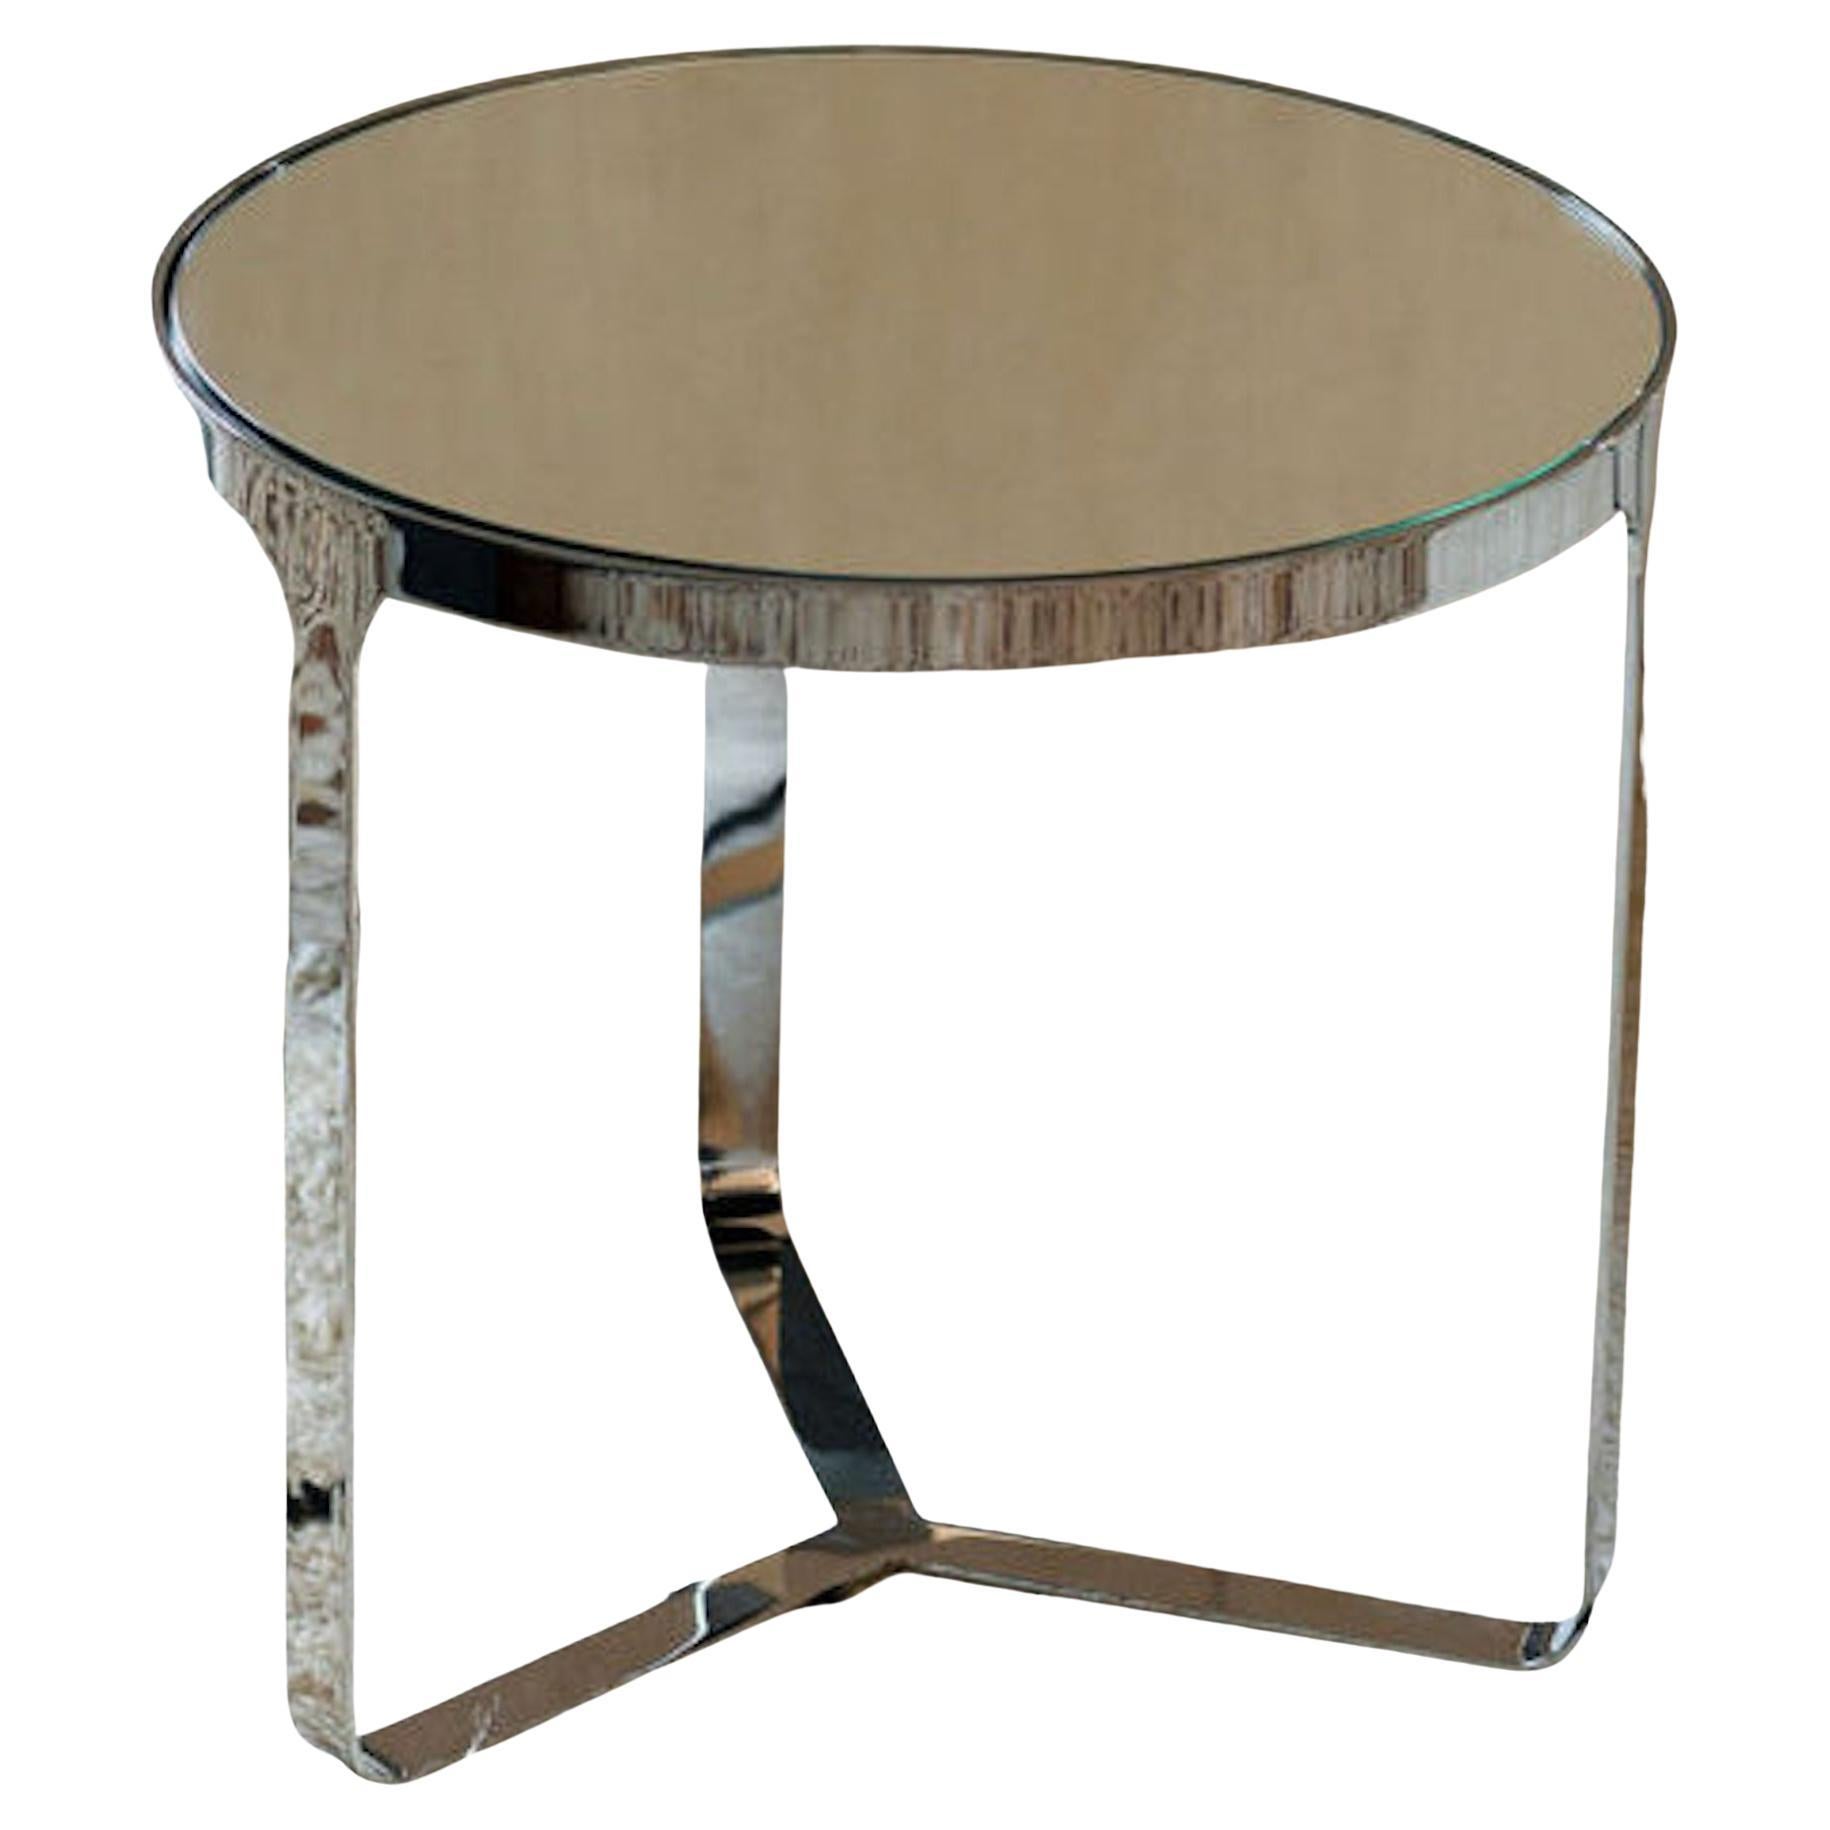  Tacchini Cage Side table by Gordon Guillaumier in STOCK